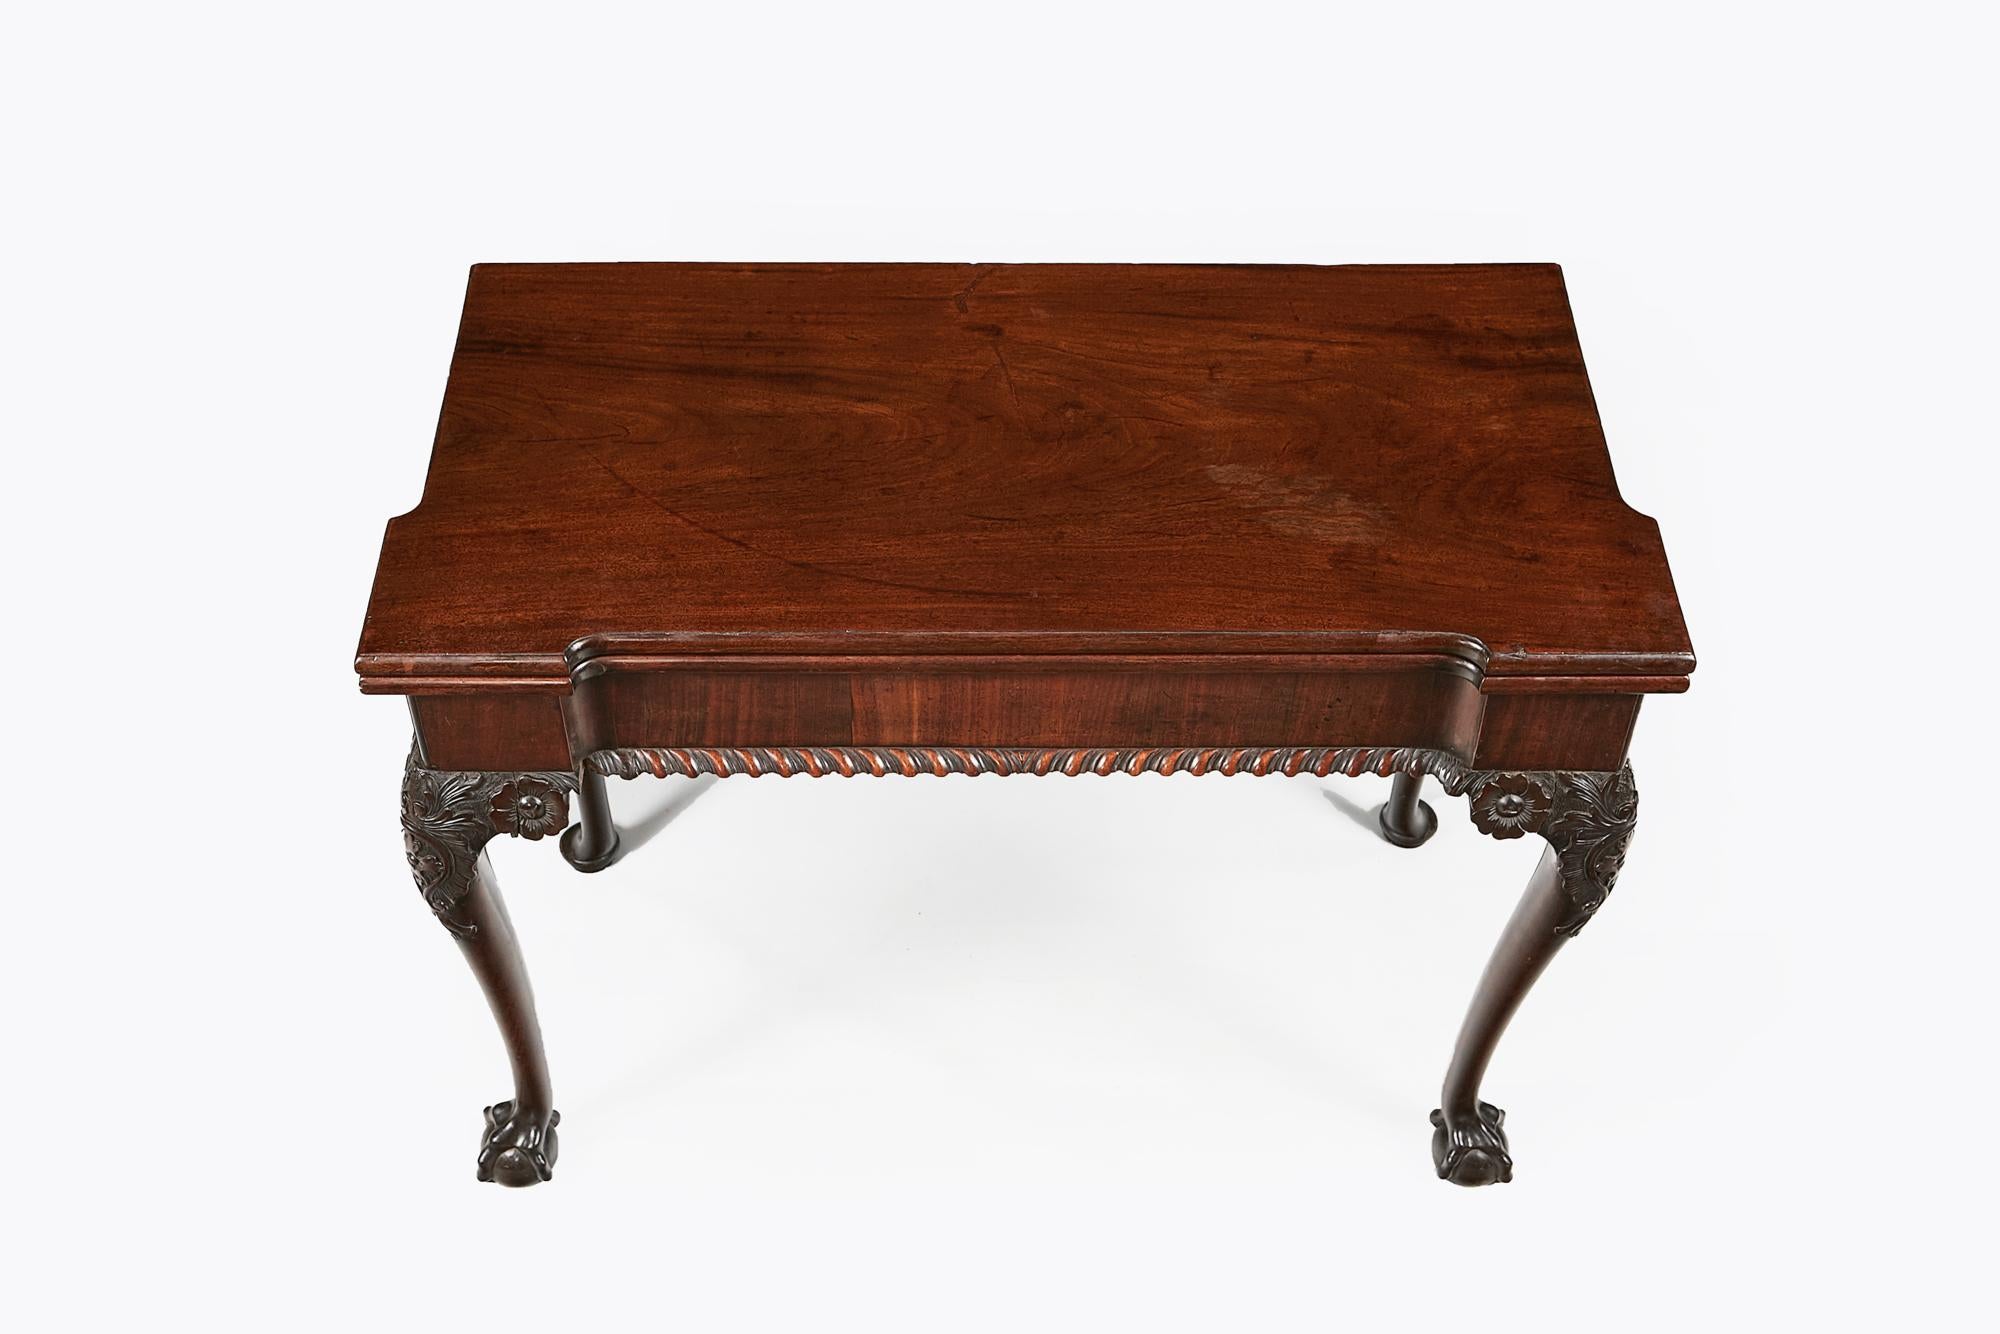 Early 19th century George III mahogany fold-over card table, the shaped and moulded top raised over frieze with carved gadroon motif supported on cabriole leg with foliate motif on knee terminating on ball and claw foot.